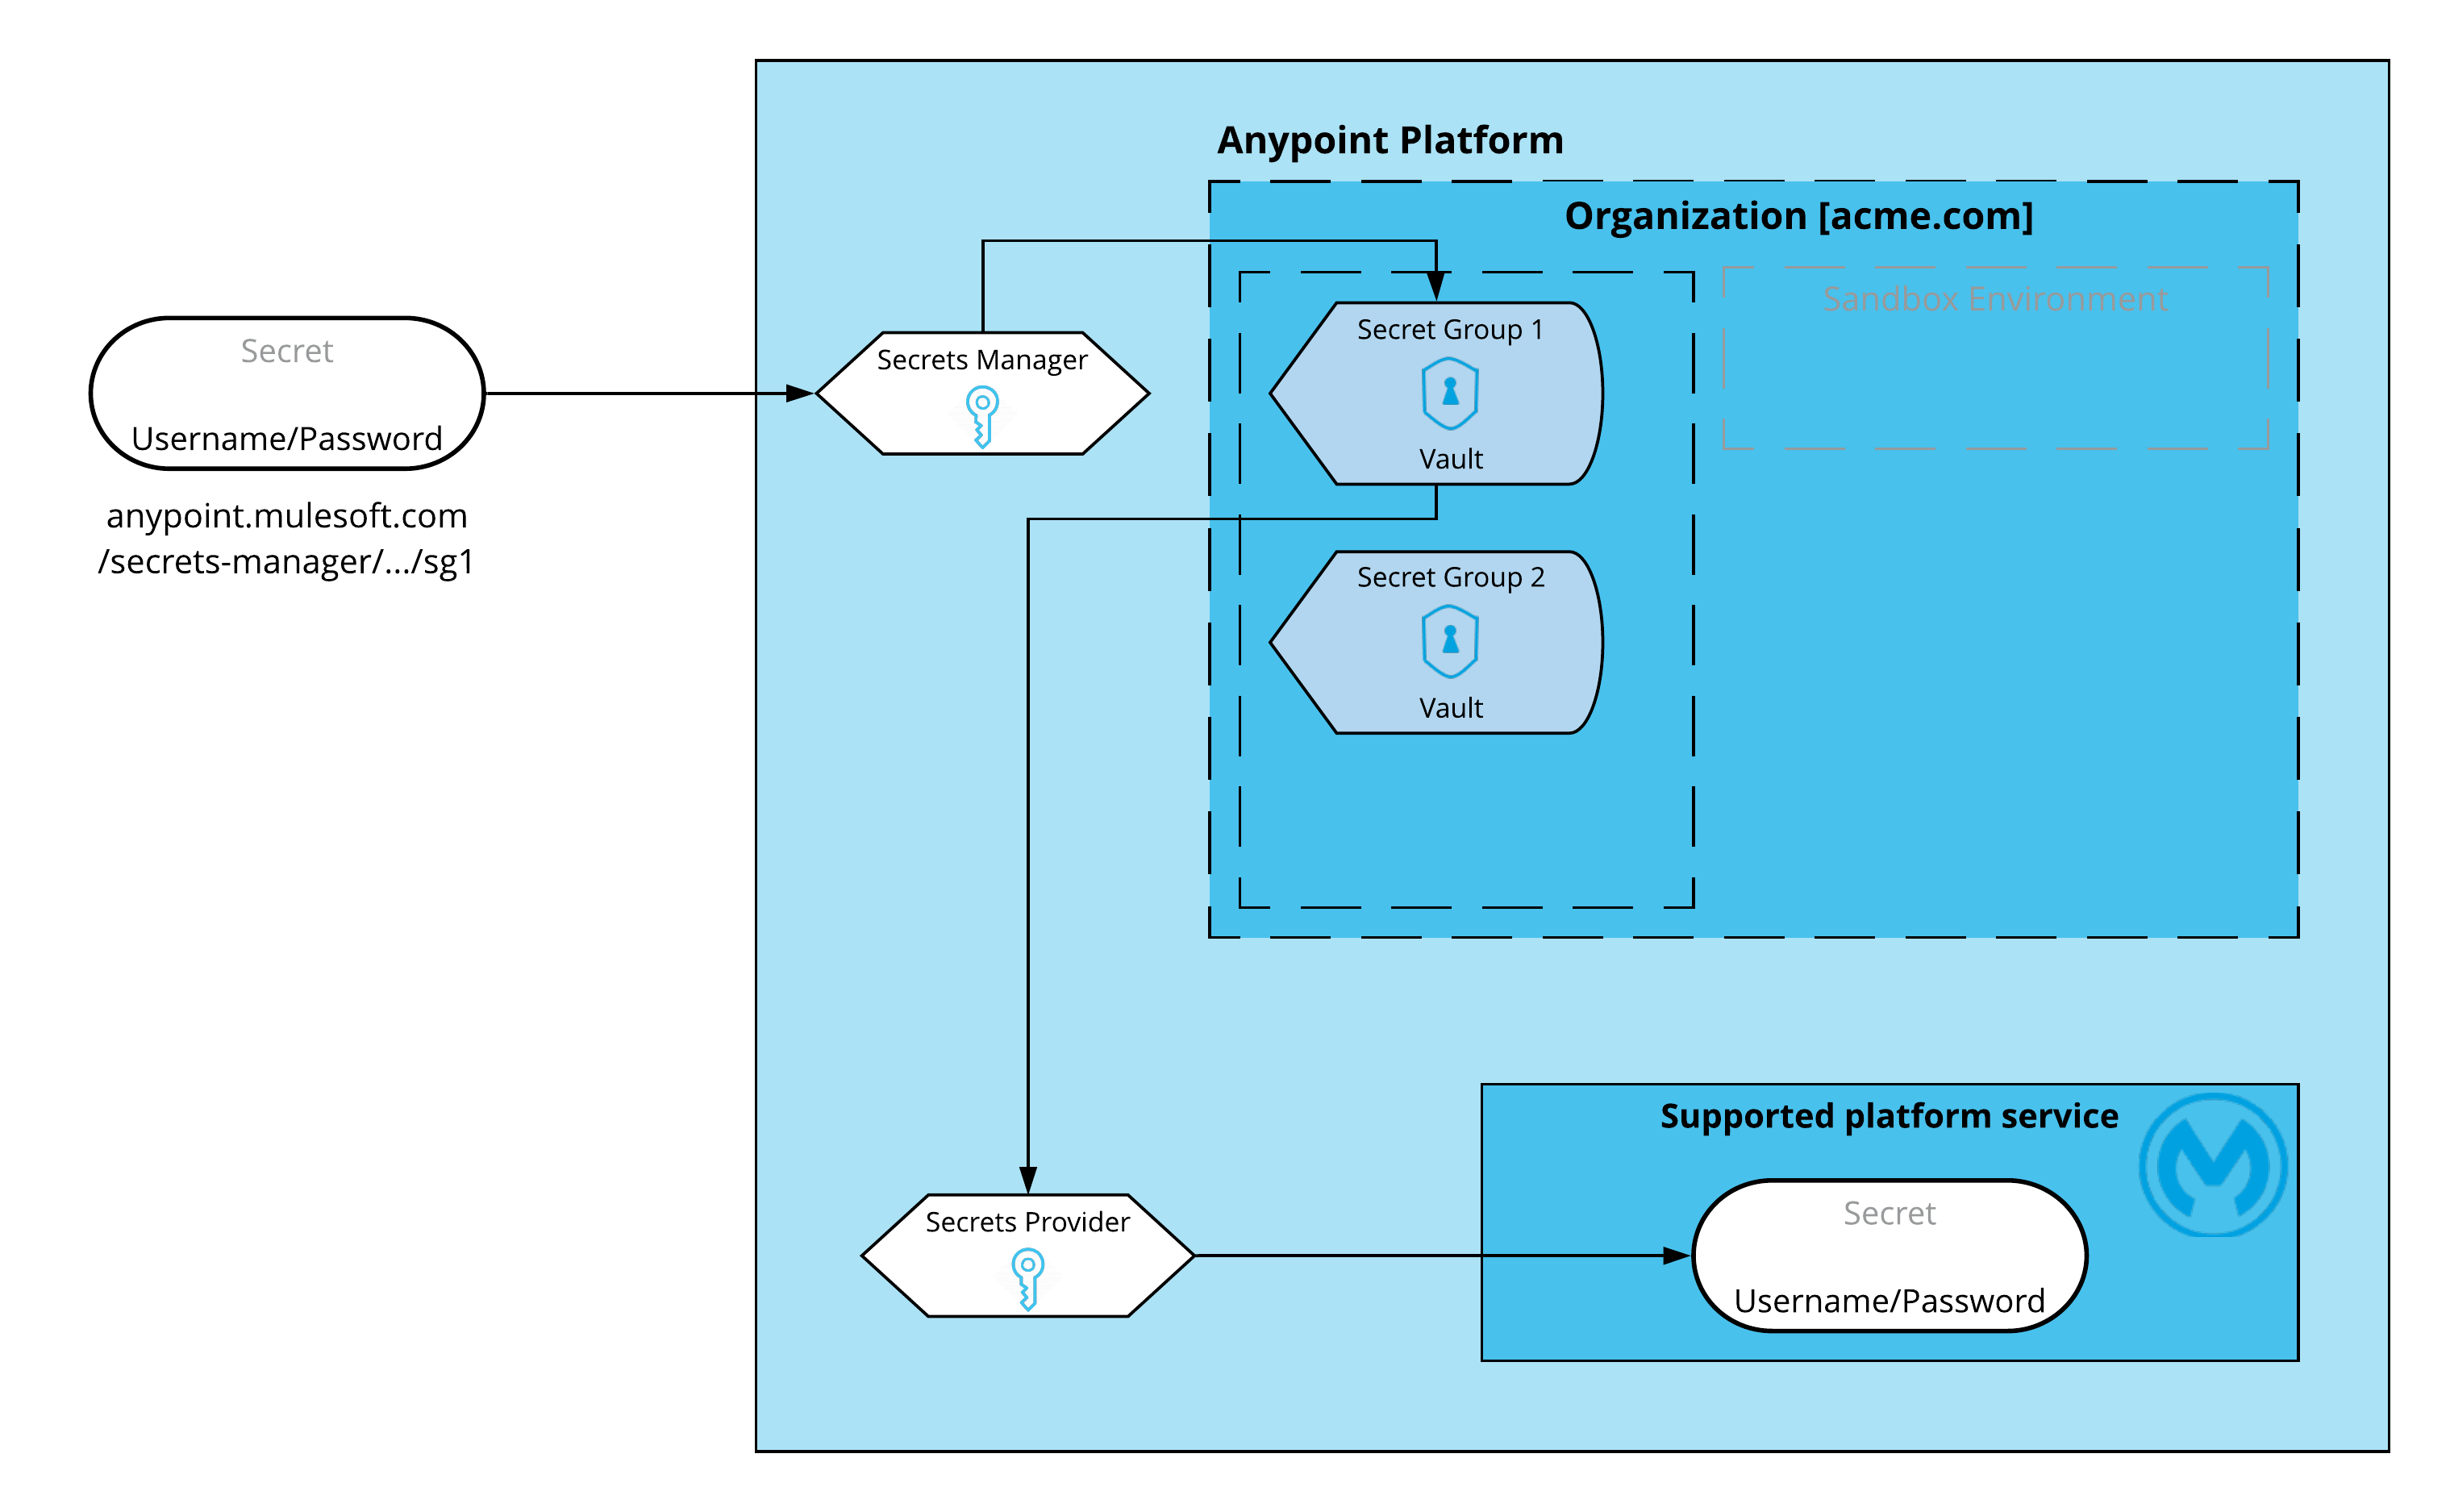 Diagram showing how secrets manager interacts with the secrets provider service and Anypoint Platform services.